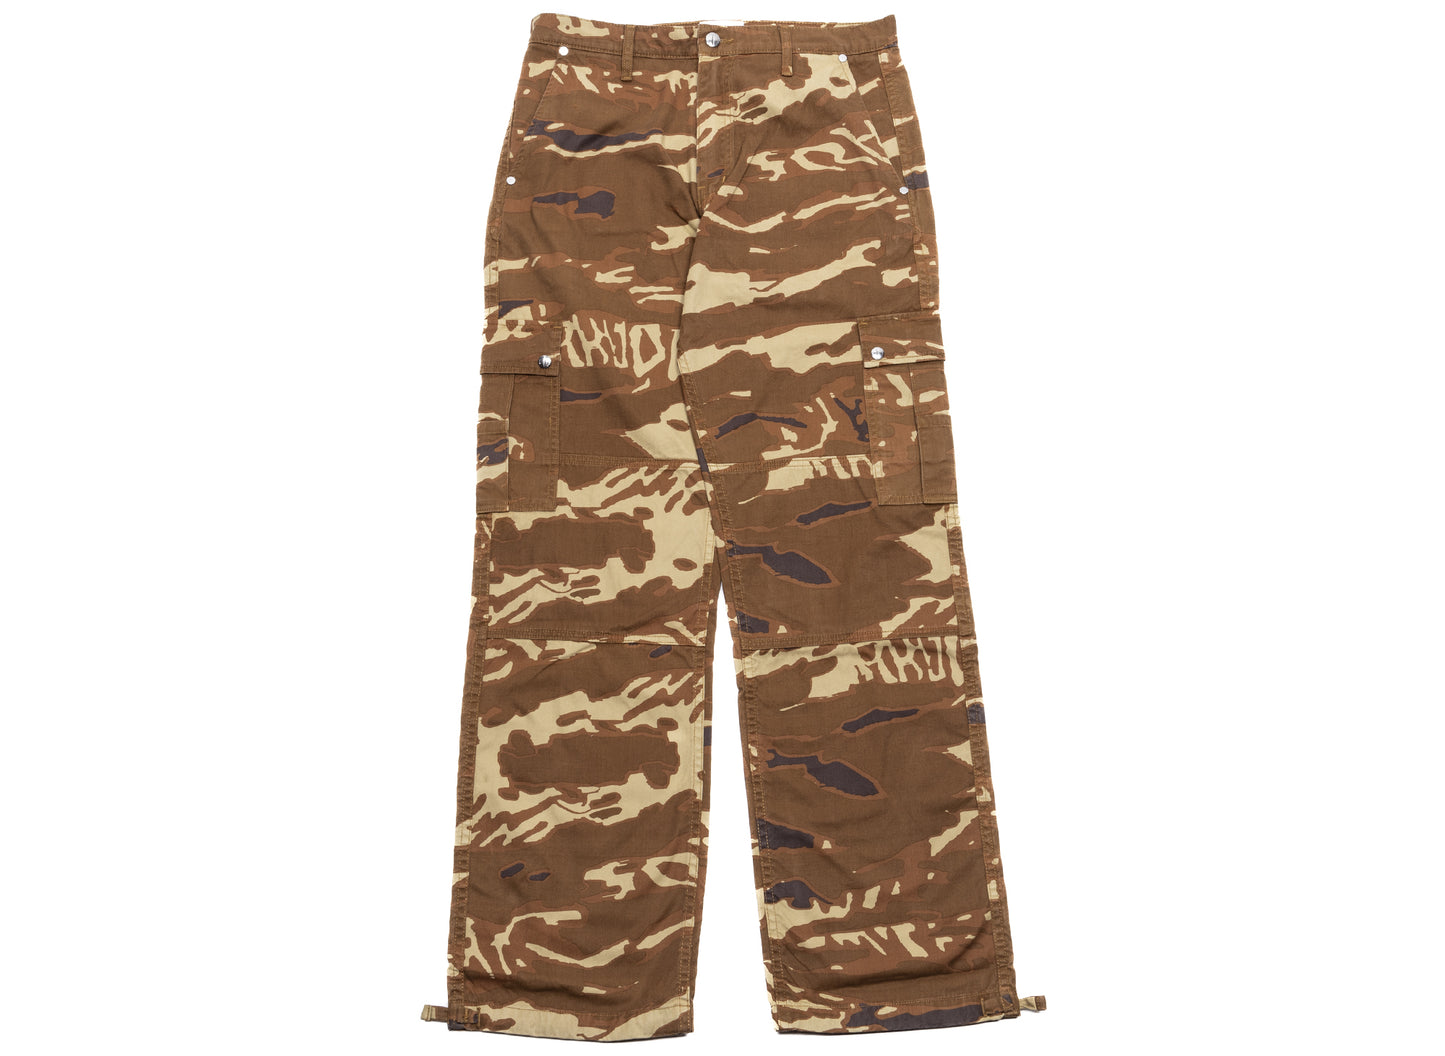 Rhude Tiger Camo Cargo Pants in Brown